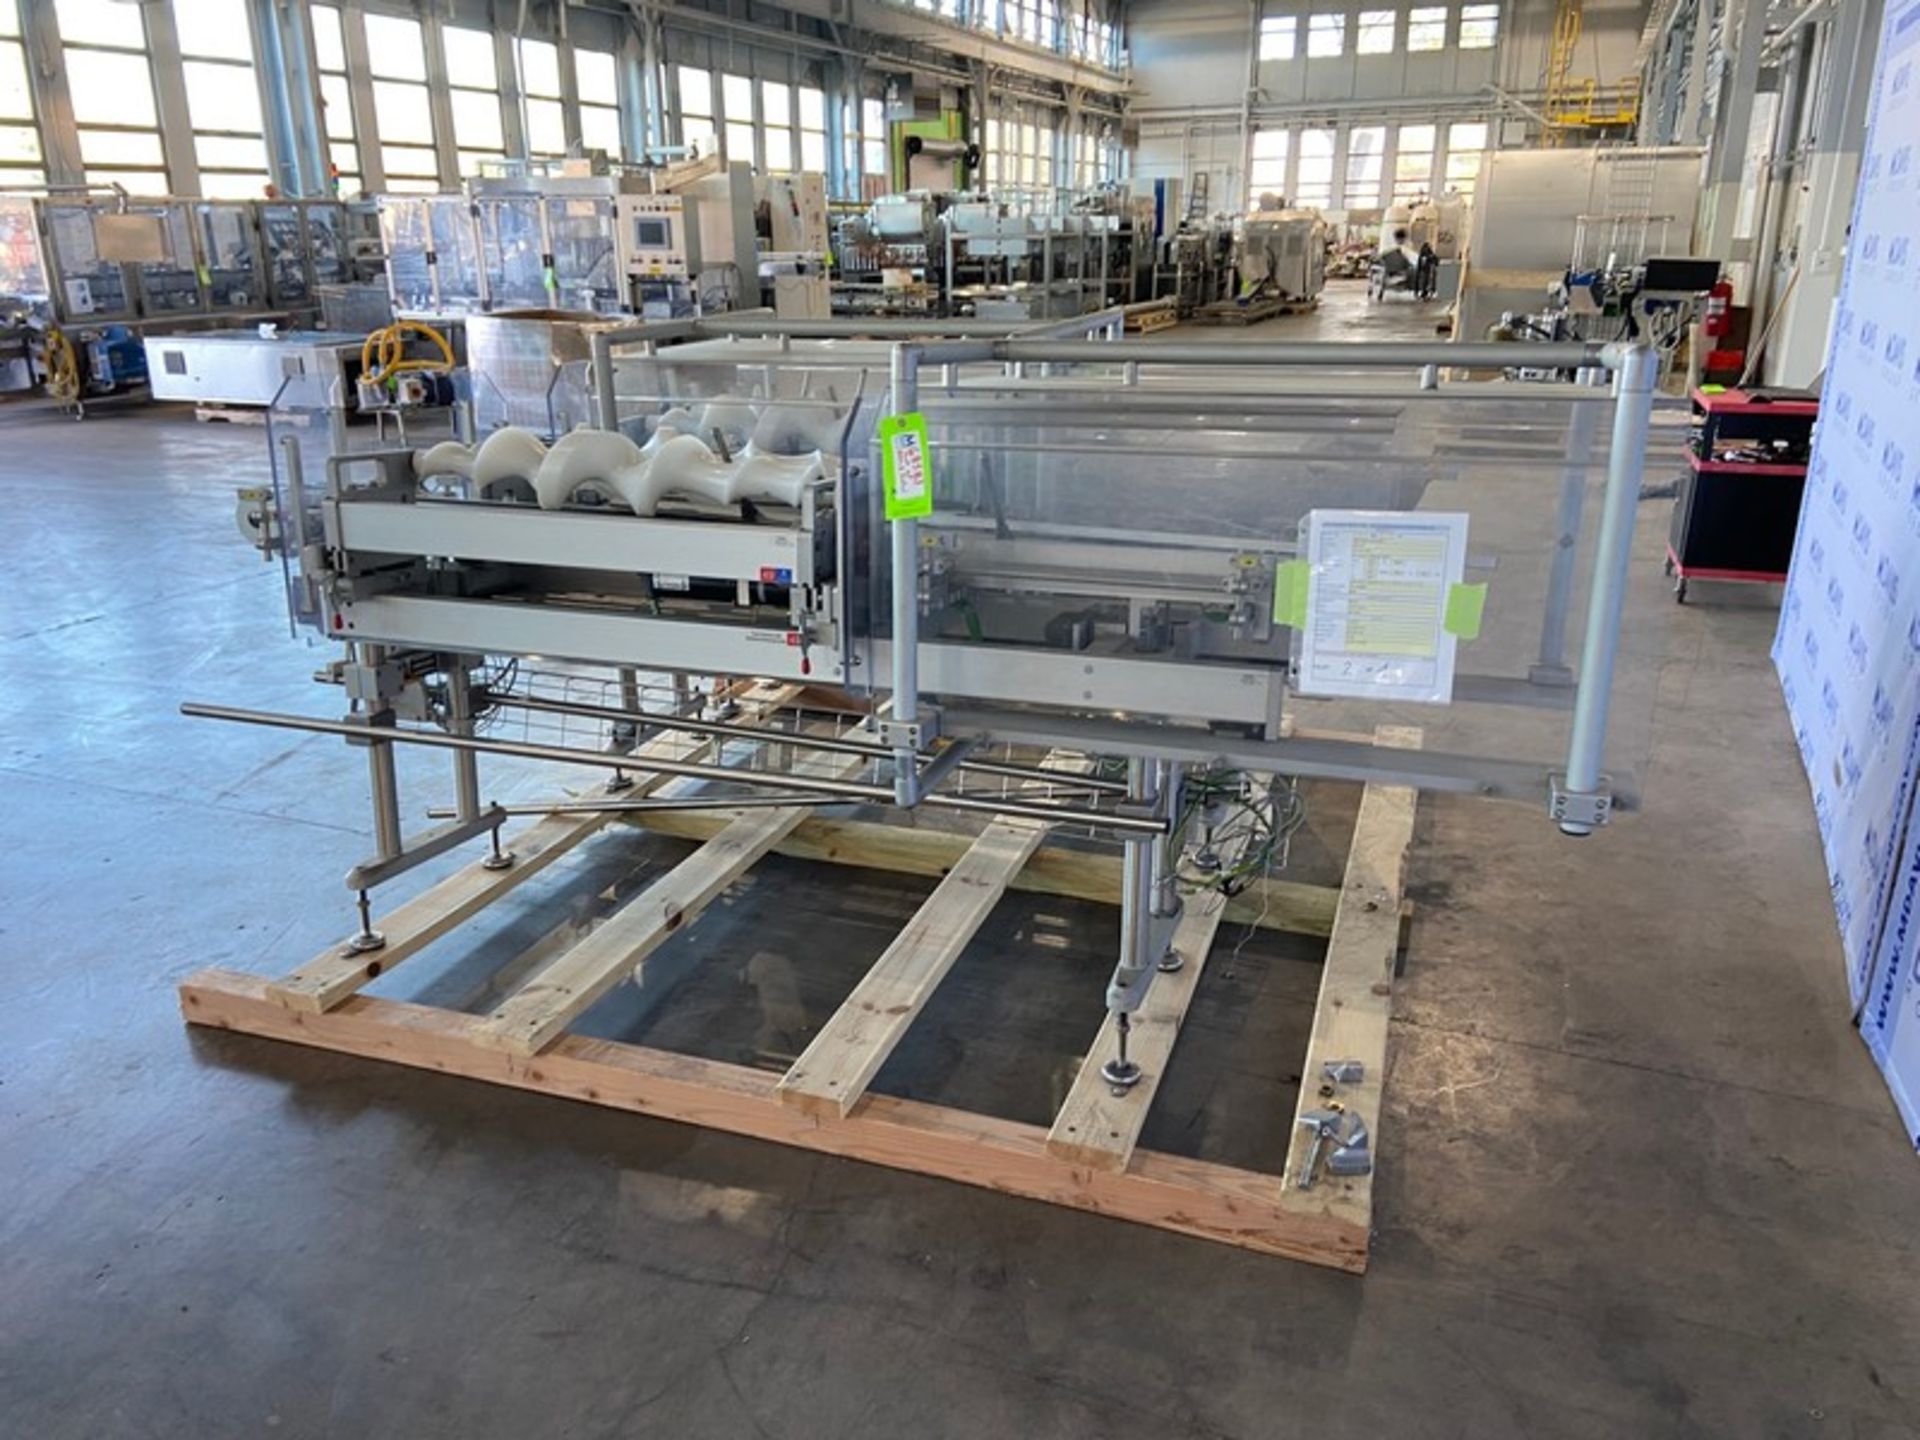 2010 Somic Verpackungsmaschinen Tray Packer,Type: WA 424-DT/2, Machine No.: N-10127/10, 480 Volts, 3 - Image 25 of 26